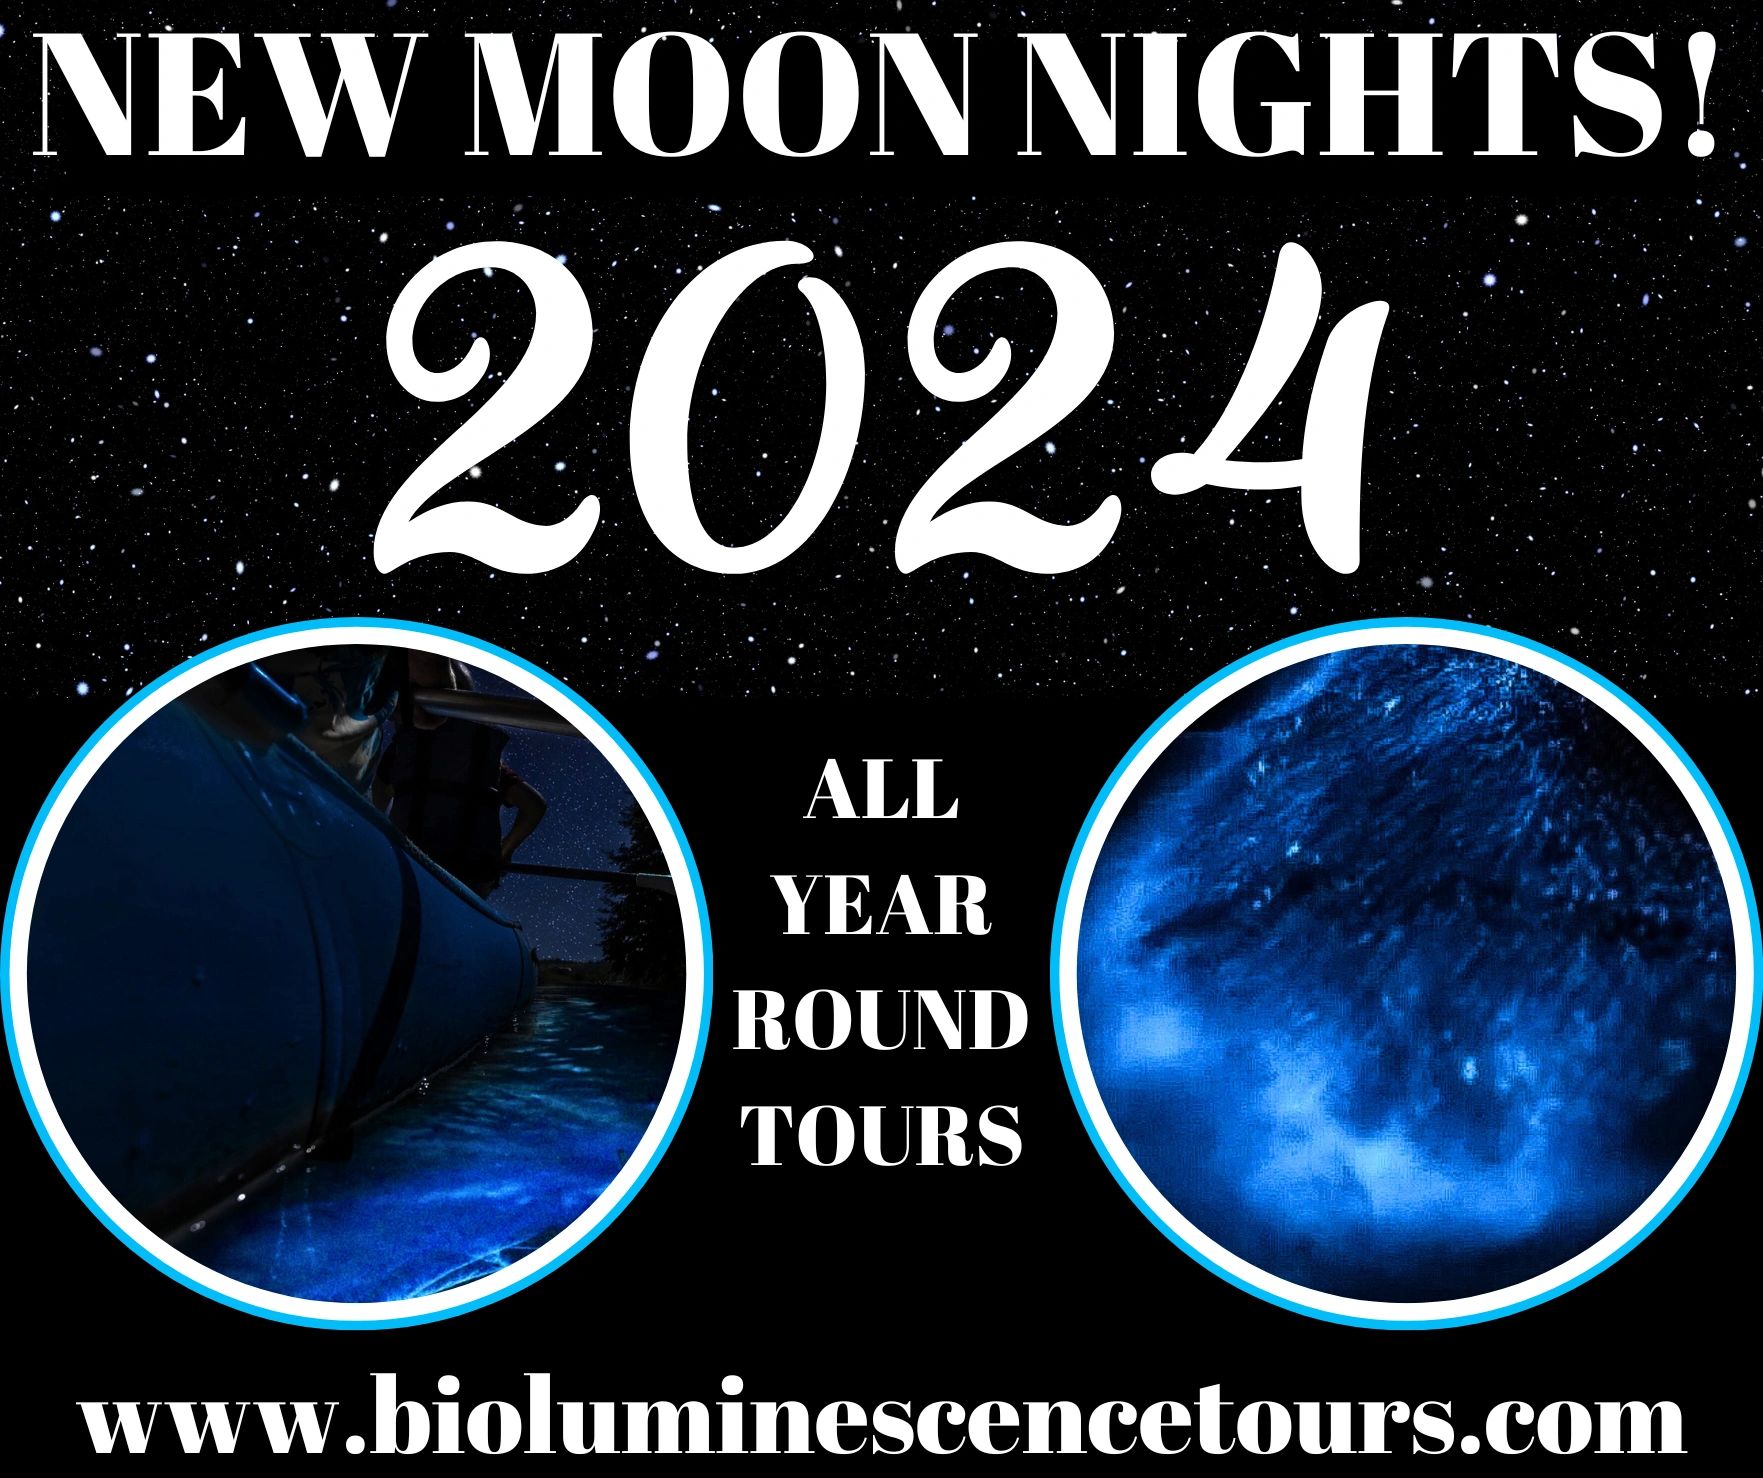 The 2024 New Moon Schedule for the Best Bioluminescence Viewing!